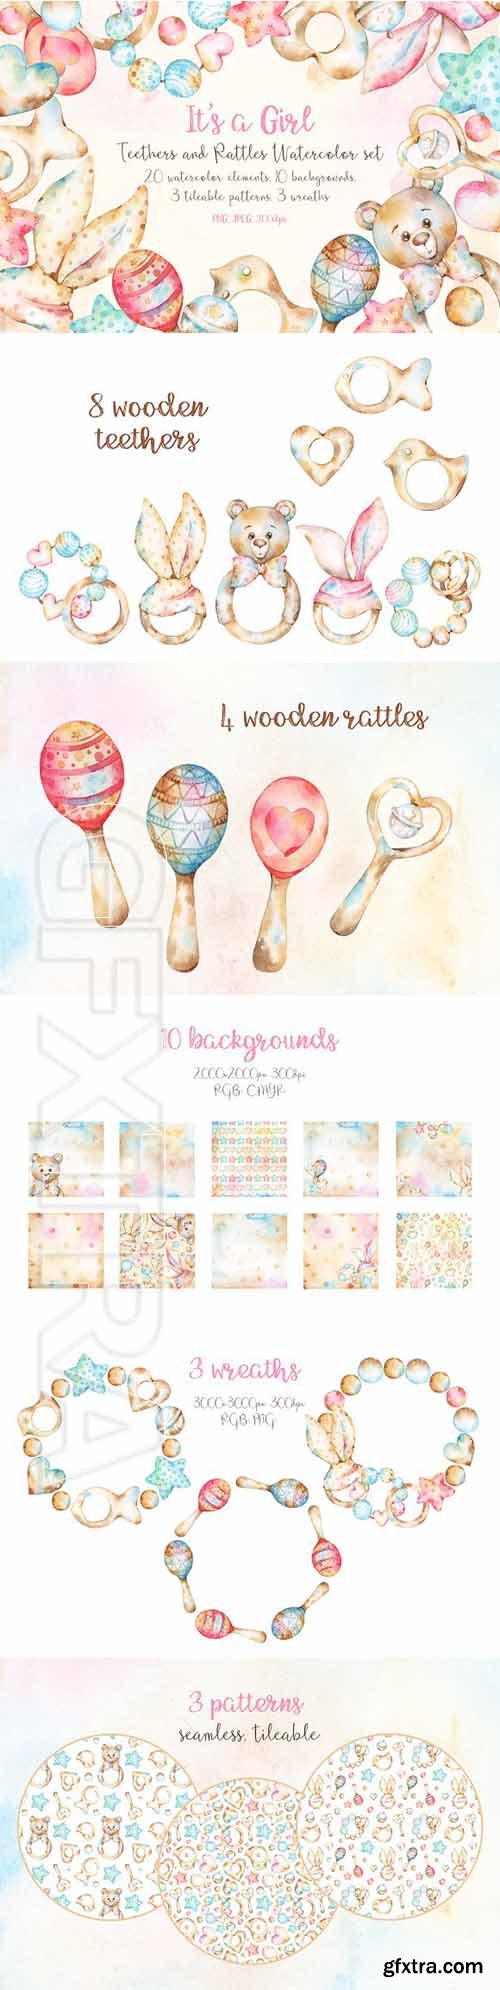 CreativeMarket - Baby girl teethers and rattles set 2171436